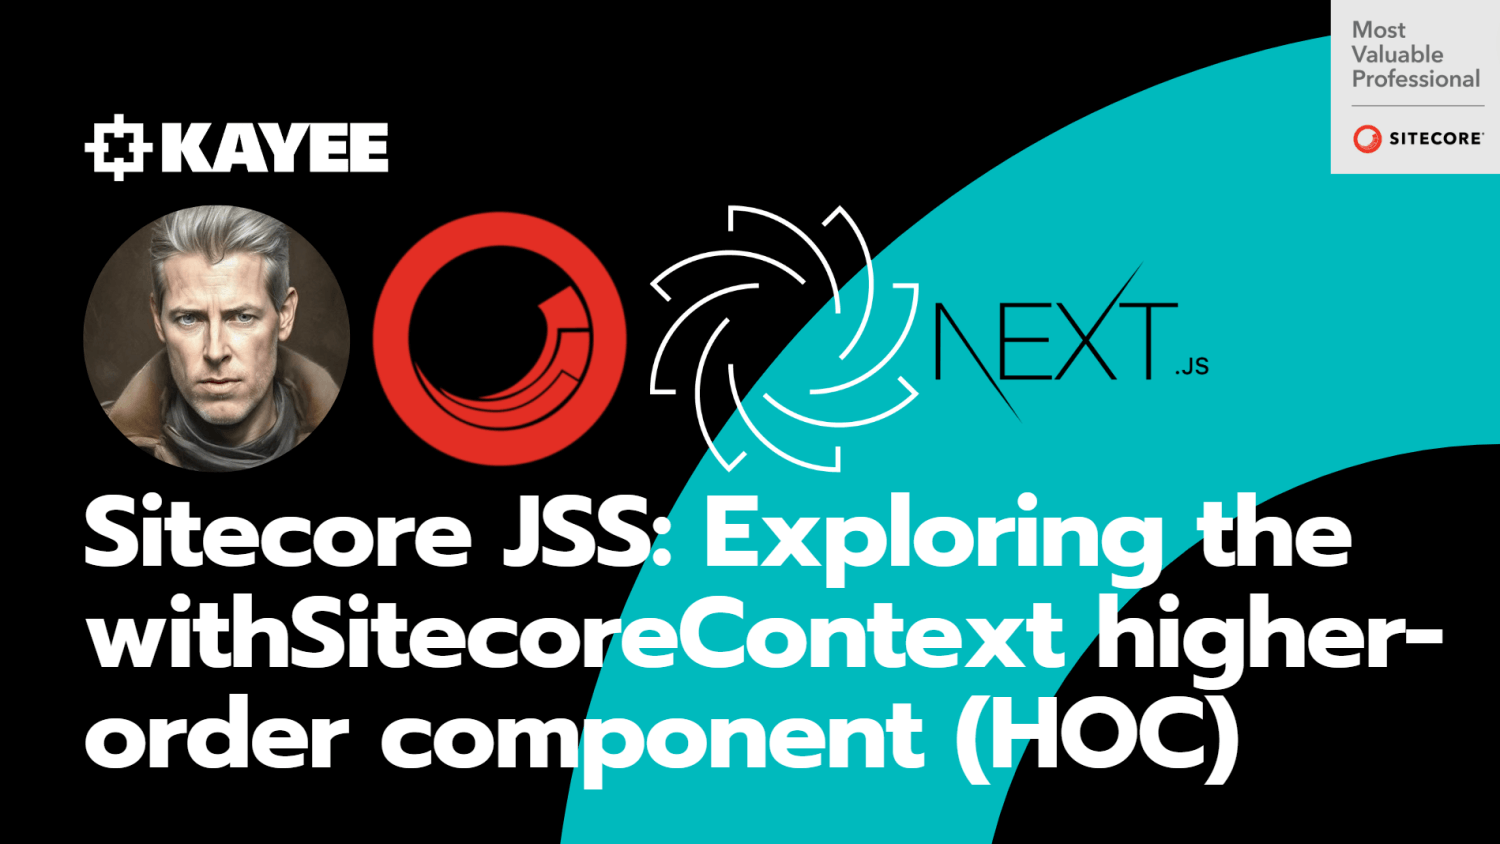 Sitecore JSS: Exploring the withSitecoreContext higher-order component (HOC)